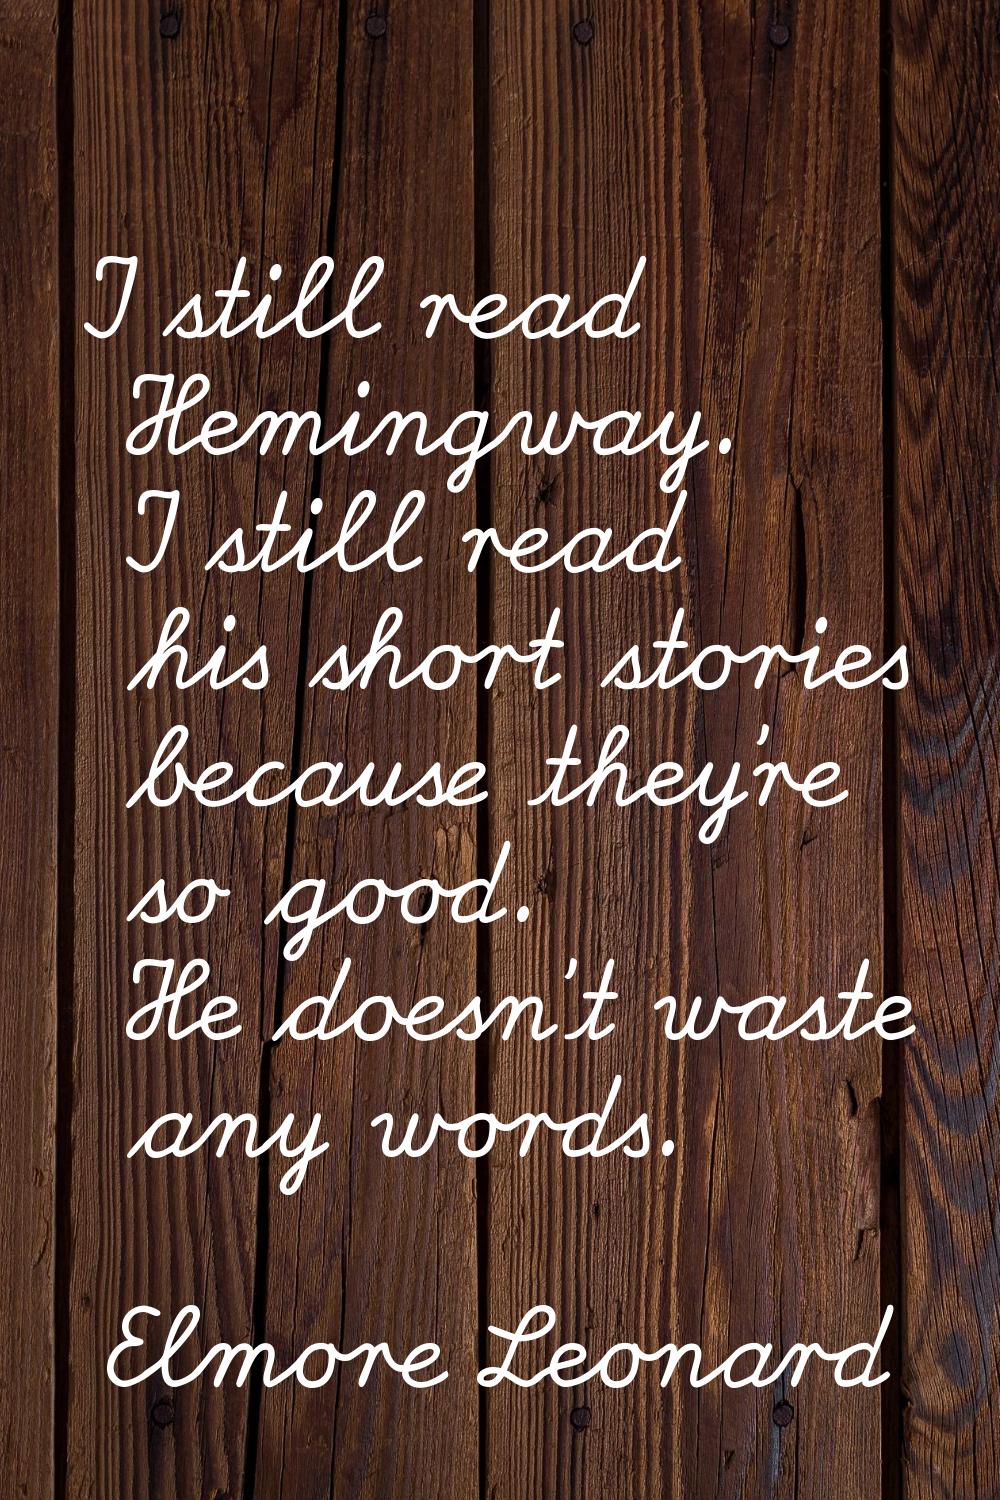 I still read Hemingway. I still read his short stories because they're so good. He doesn't waste an